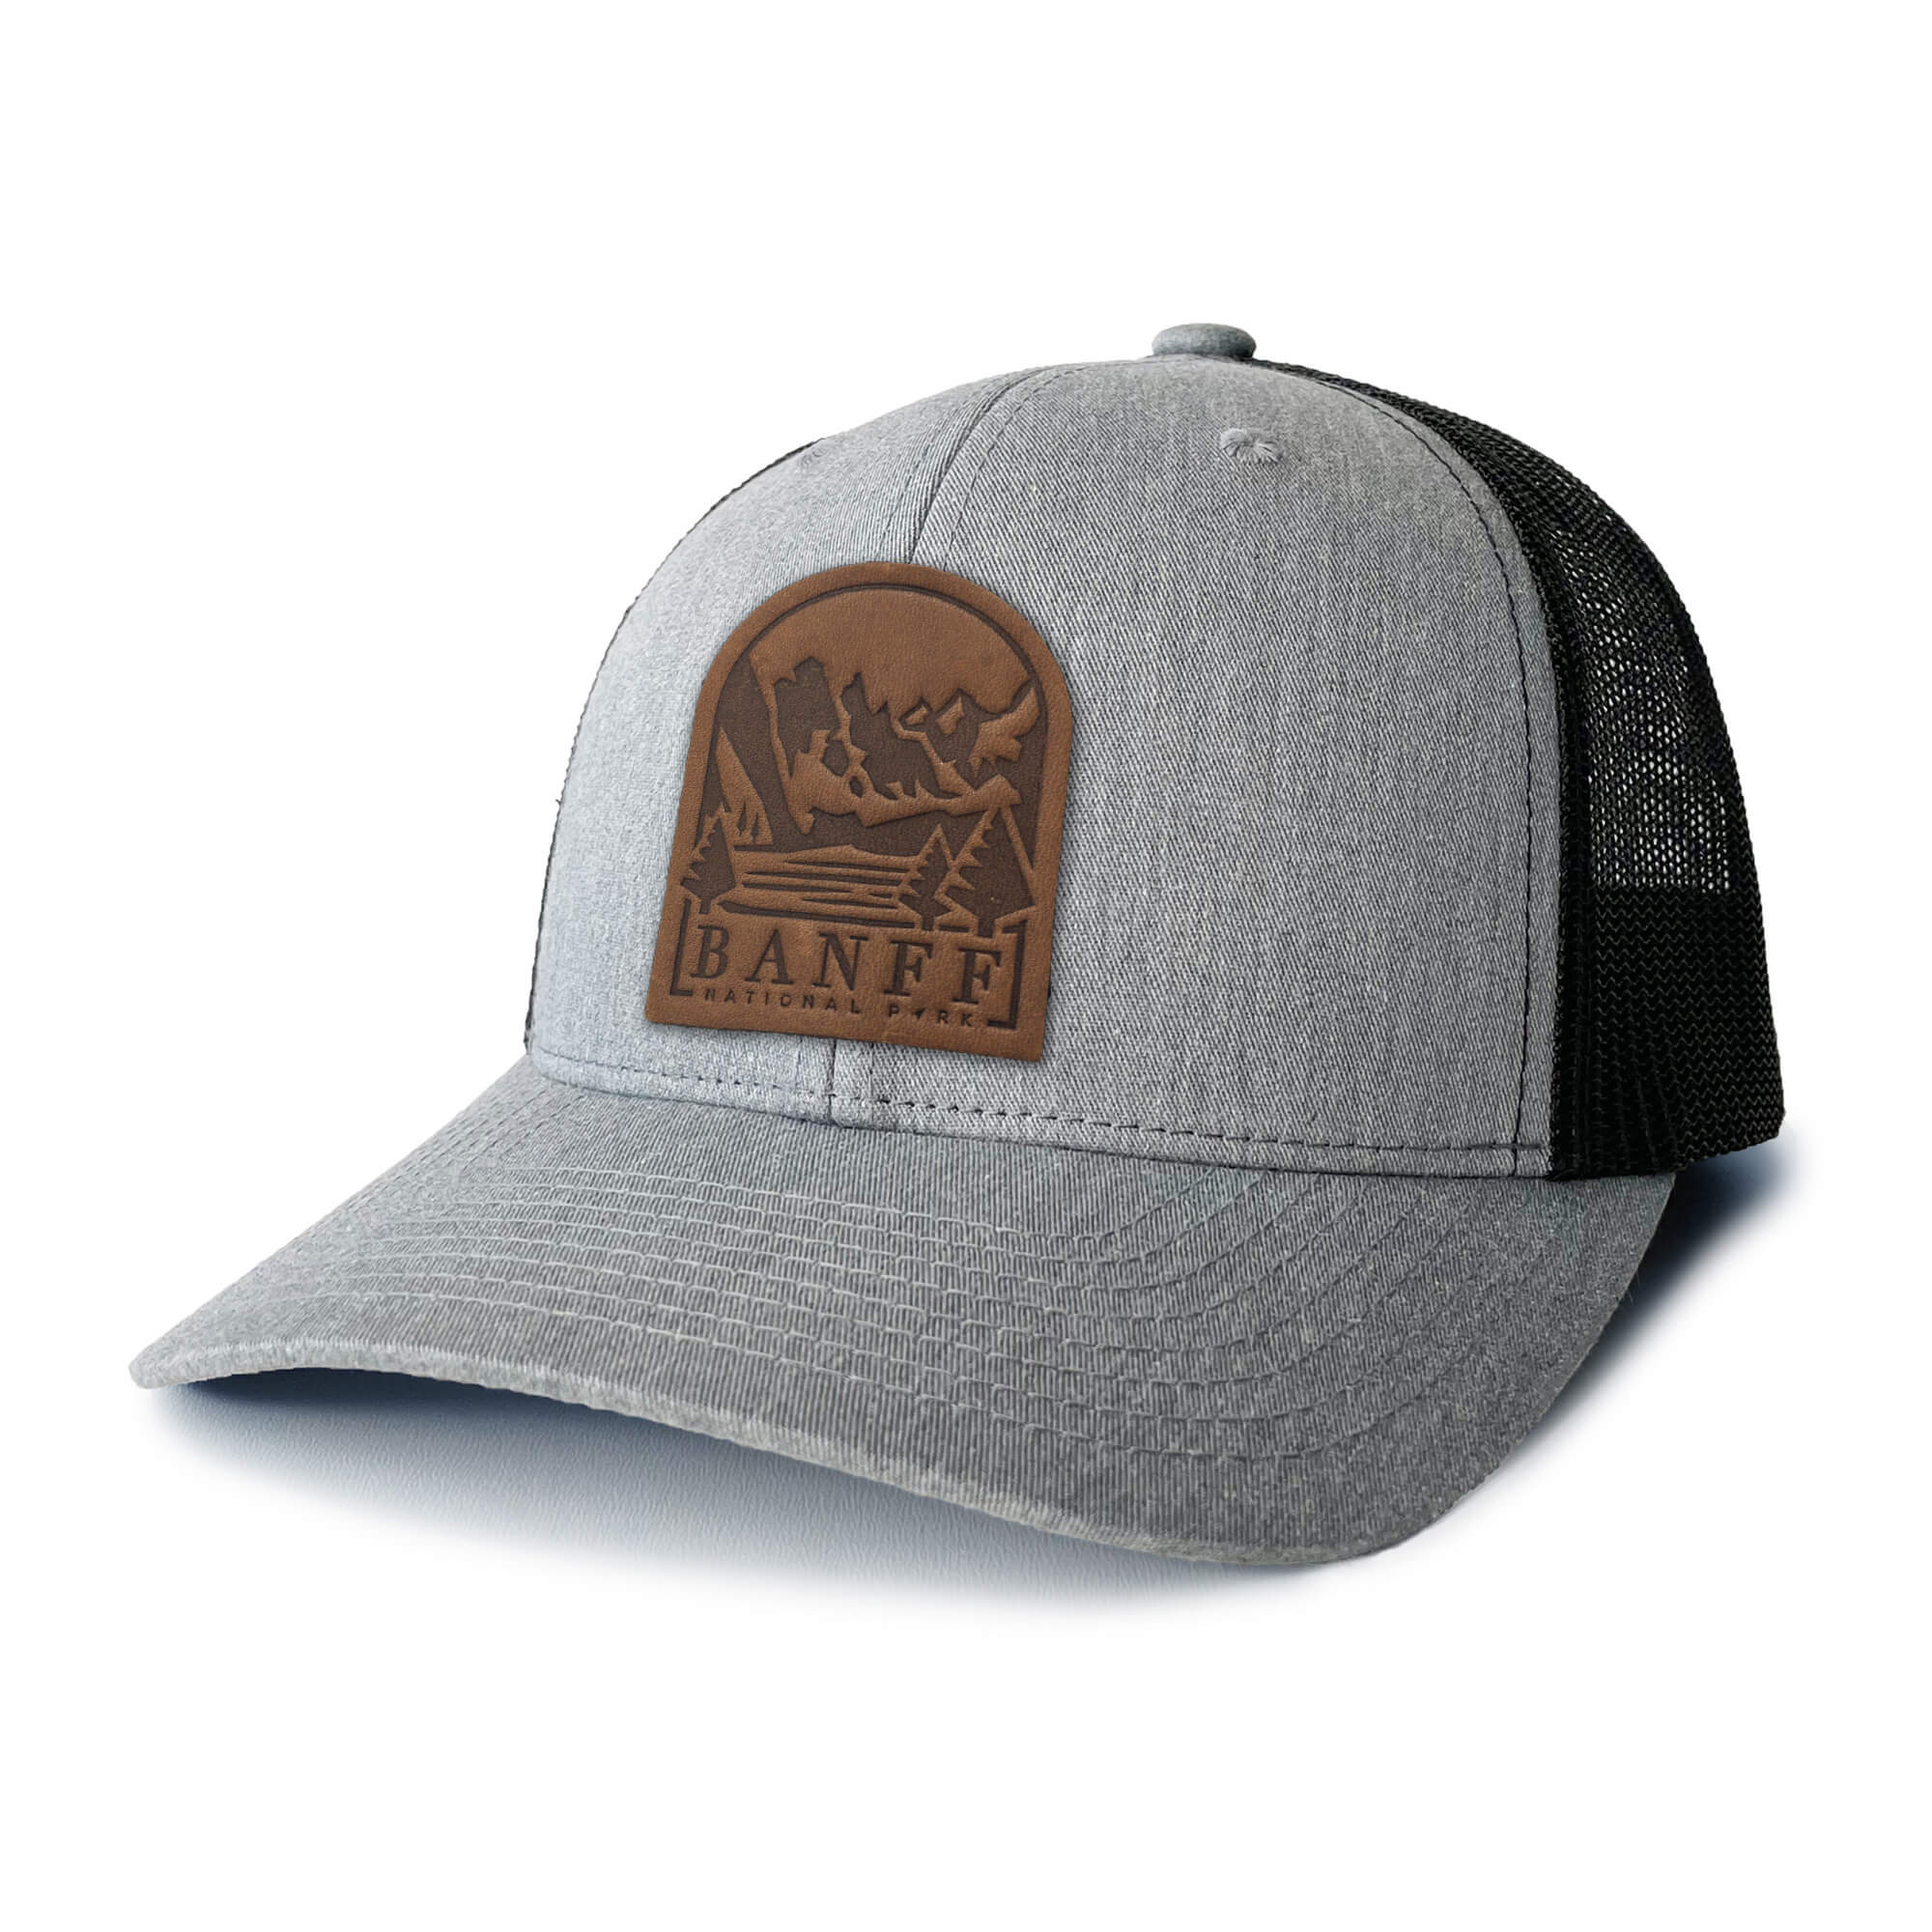 Heather Grey and white trucker hat with full-grain leather patch of Banff National Park | BLACK-007-001, CHARC-007-001, NAVY-007-001, HGREY-007-001, MOSS-007-001, BROWN-007-001